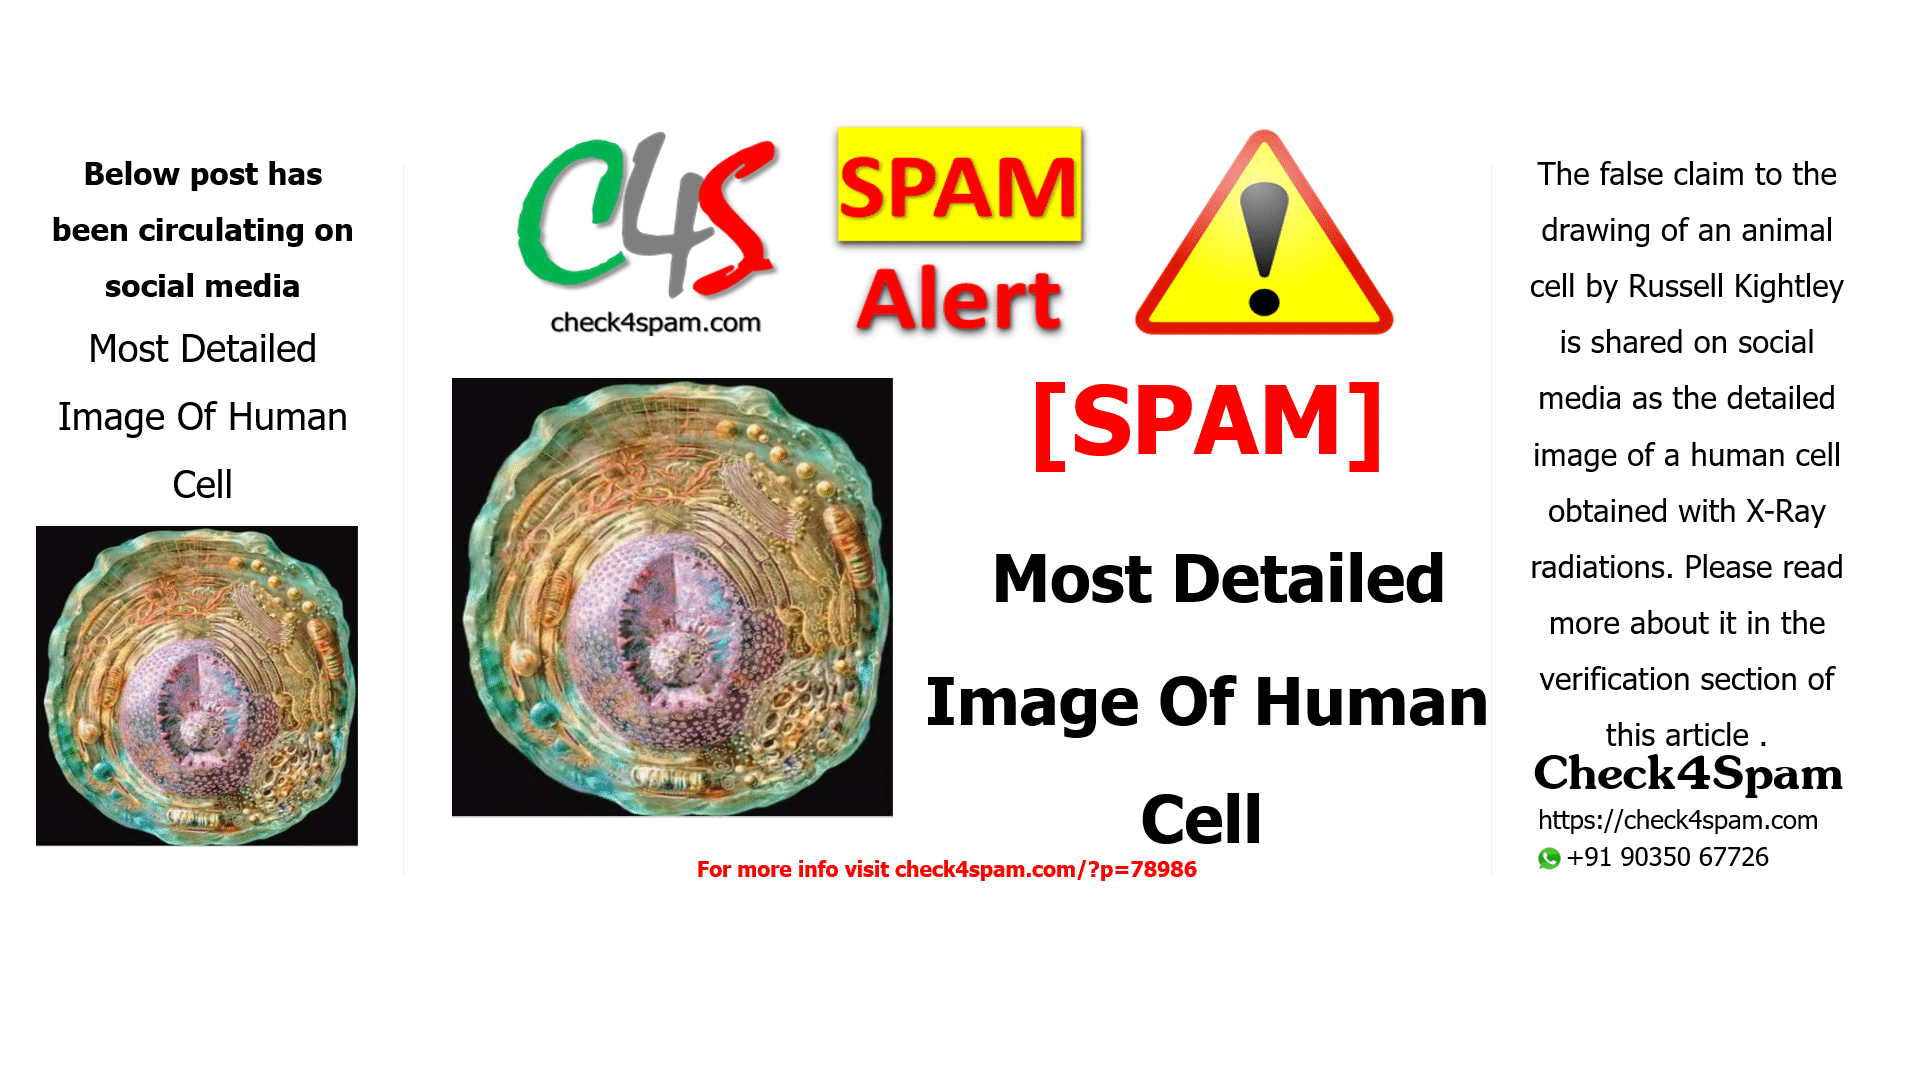 Most Detailed Image Of Human Cell